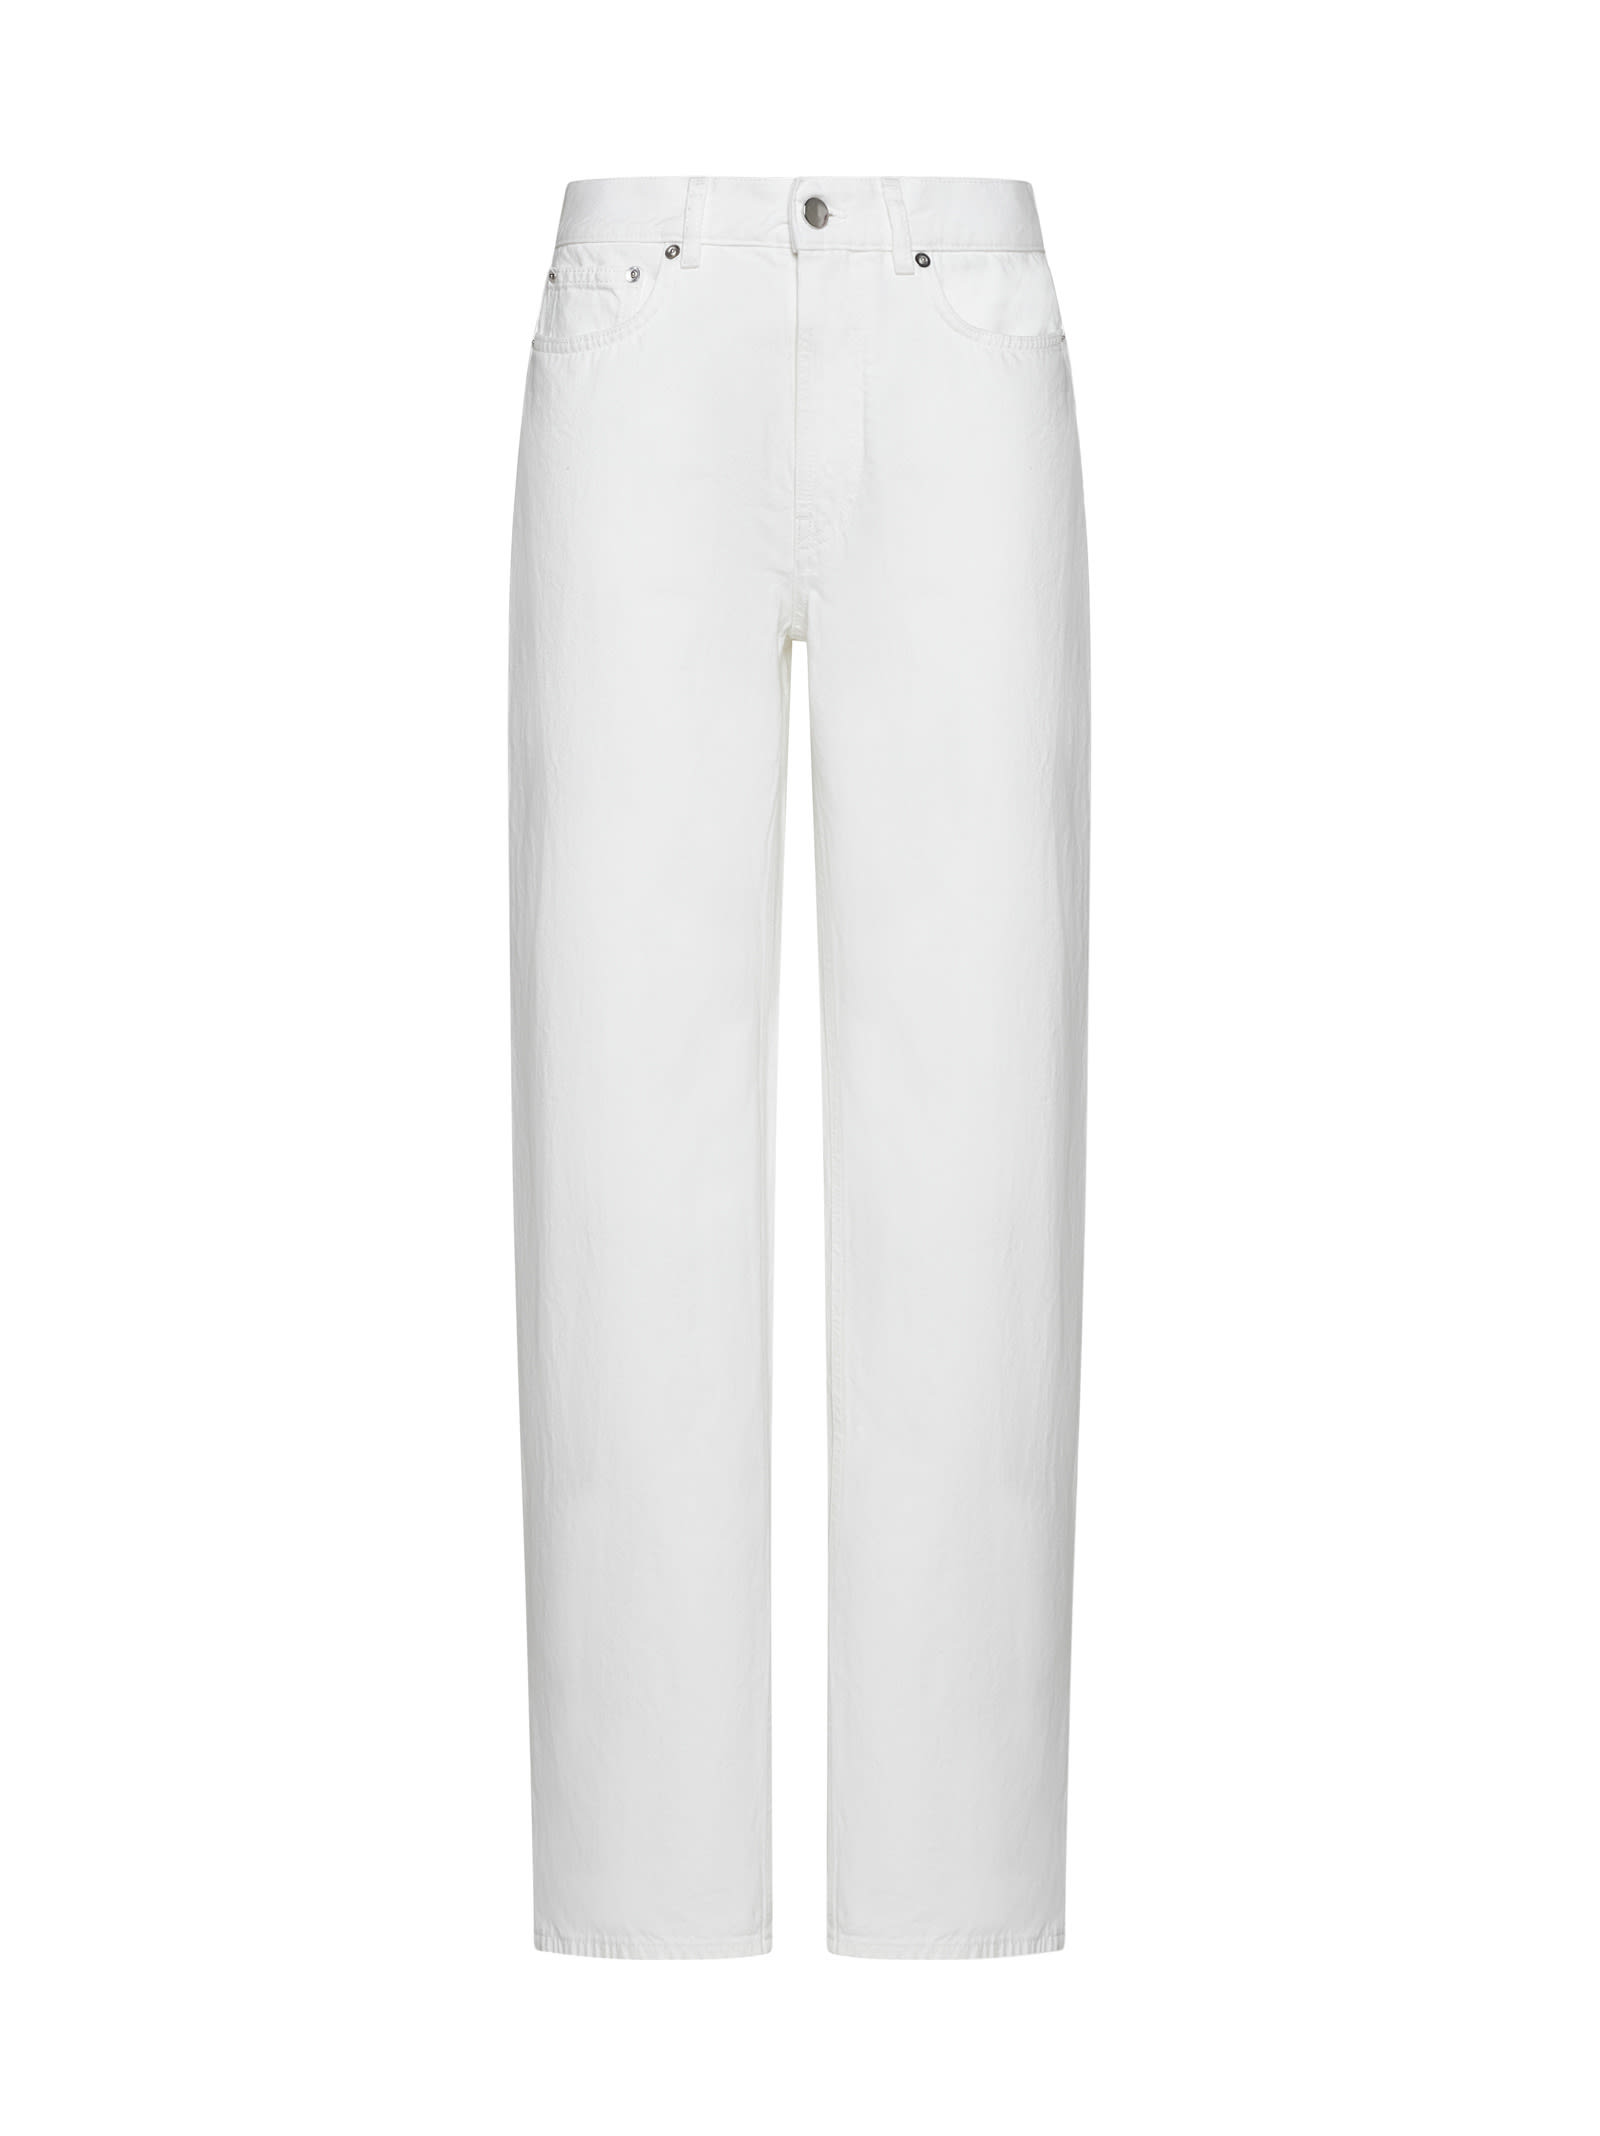 Loulou Studio Jeans In Ivory